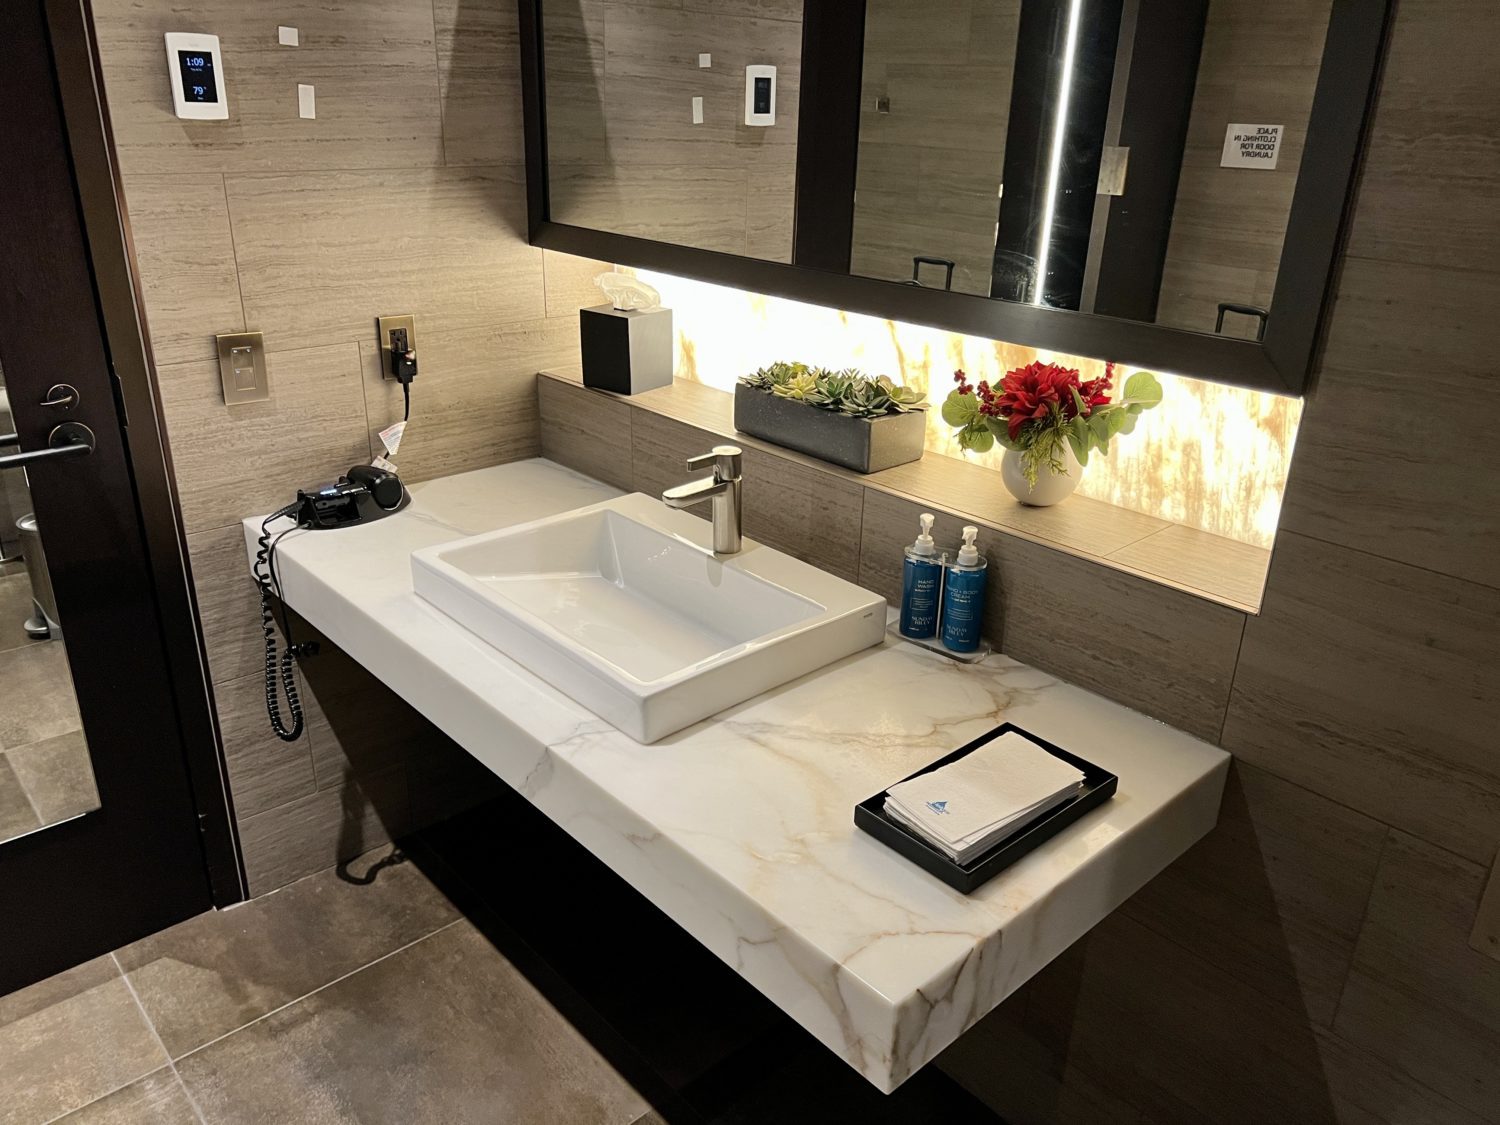 united polaris lounge chicago shower suite  Beautiful But Busy: United Polaris Lounge Chicago-O&#039;Hare (ORD) Review – Thrifty Traveler &#8211; Thrifty Traveler united polaris lounge chicago shower suite scaled